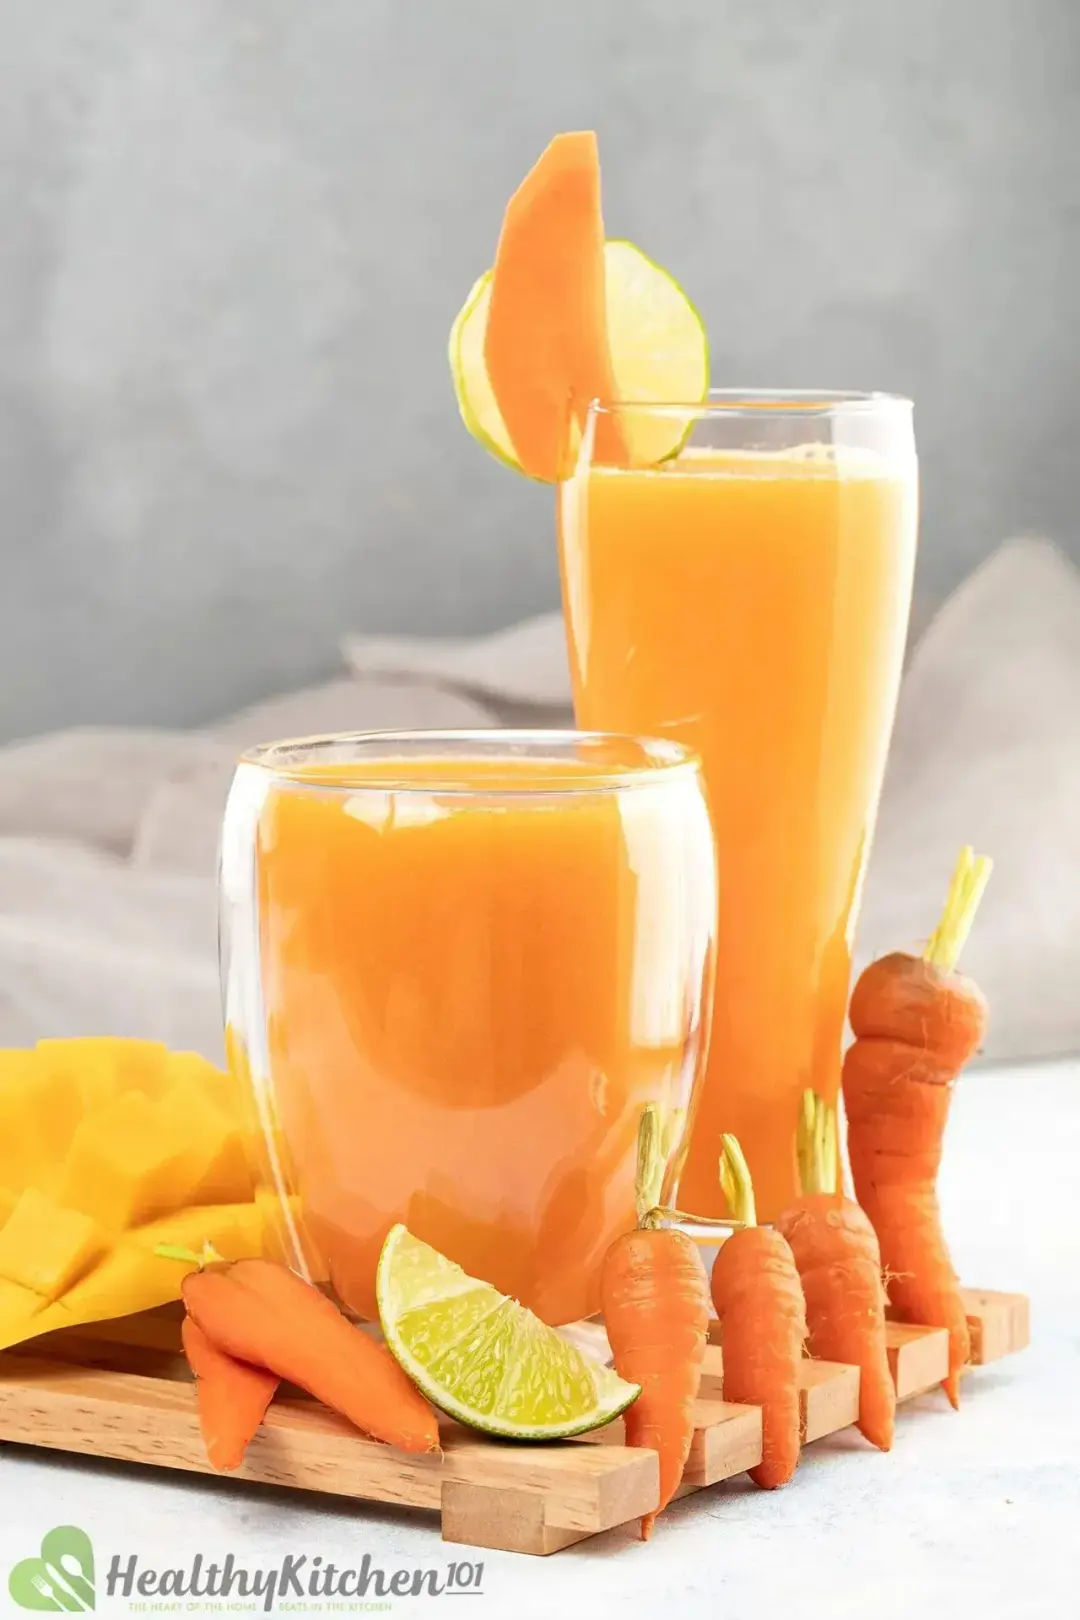 Top 10 Best Carrot Juice Recipes: Simple, Tasty Drinks Done In No Time